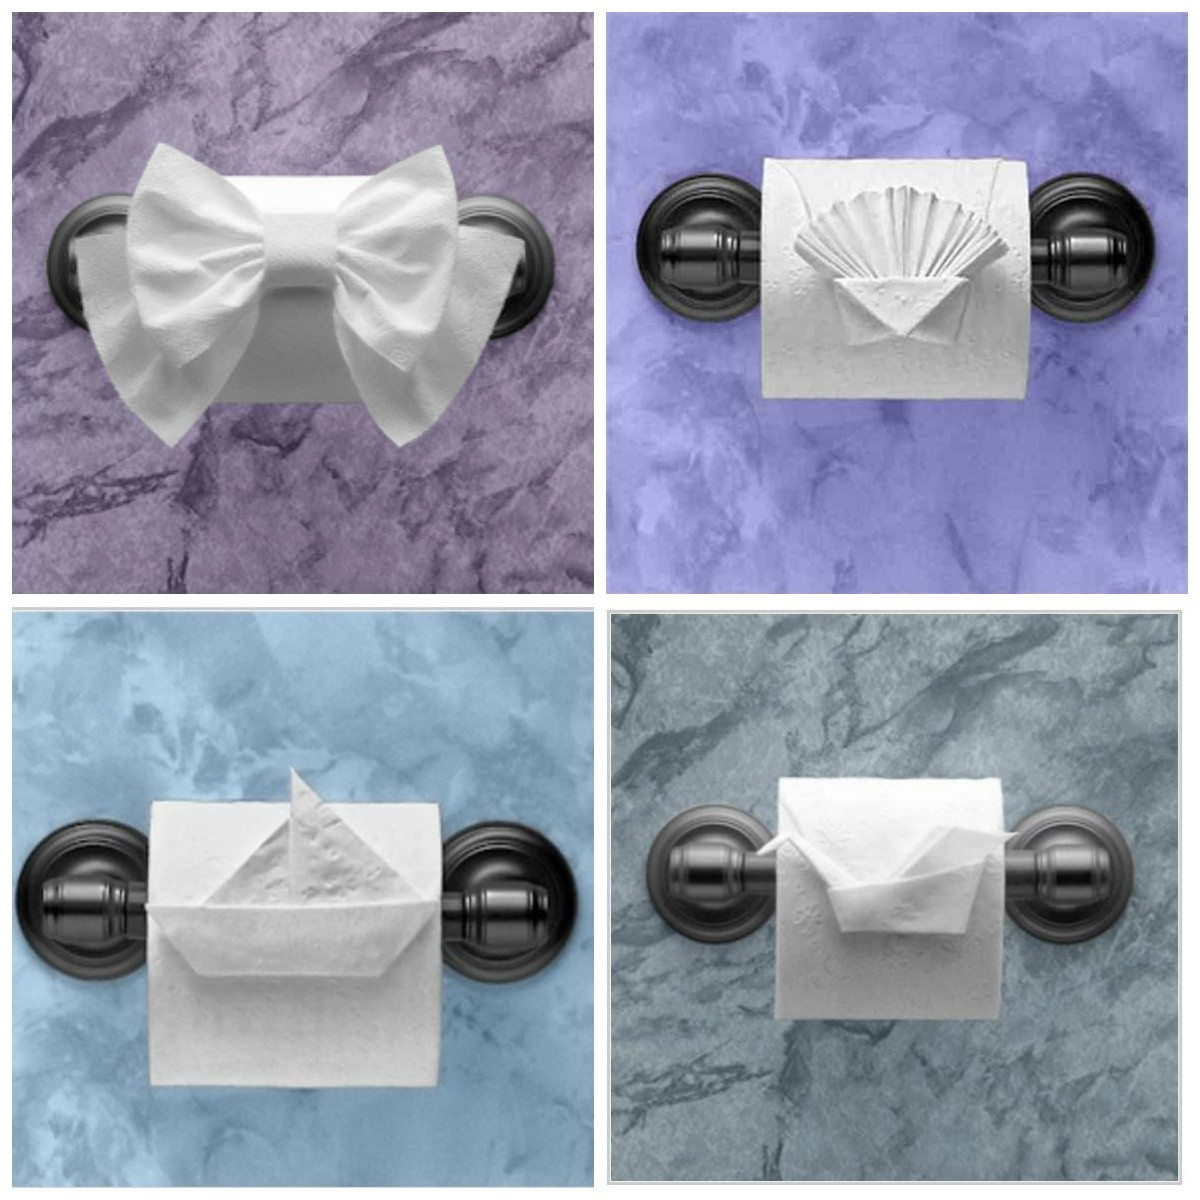 Origami Toilet Paper Impress House Guests With Toilet Paper Origami All About Japan